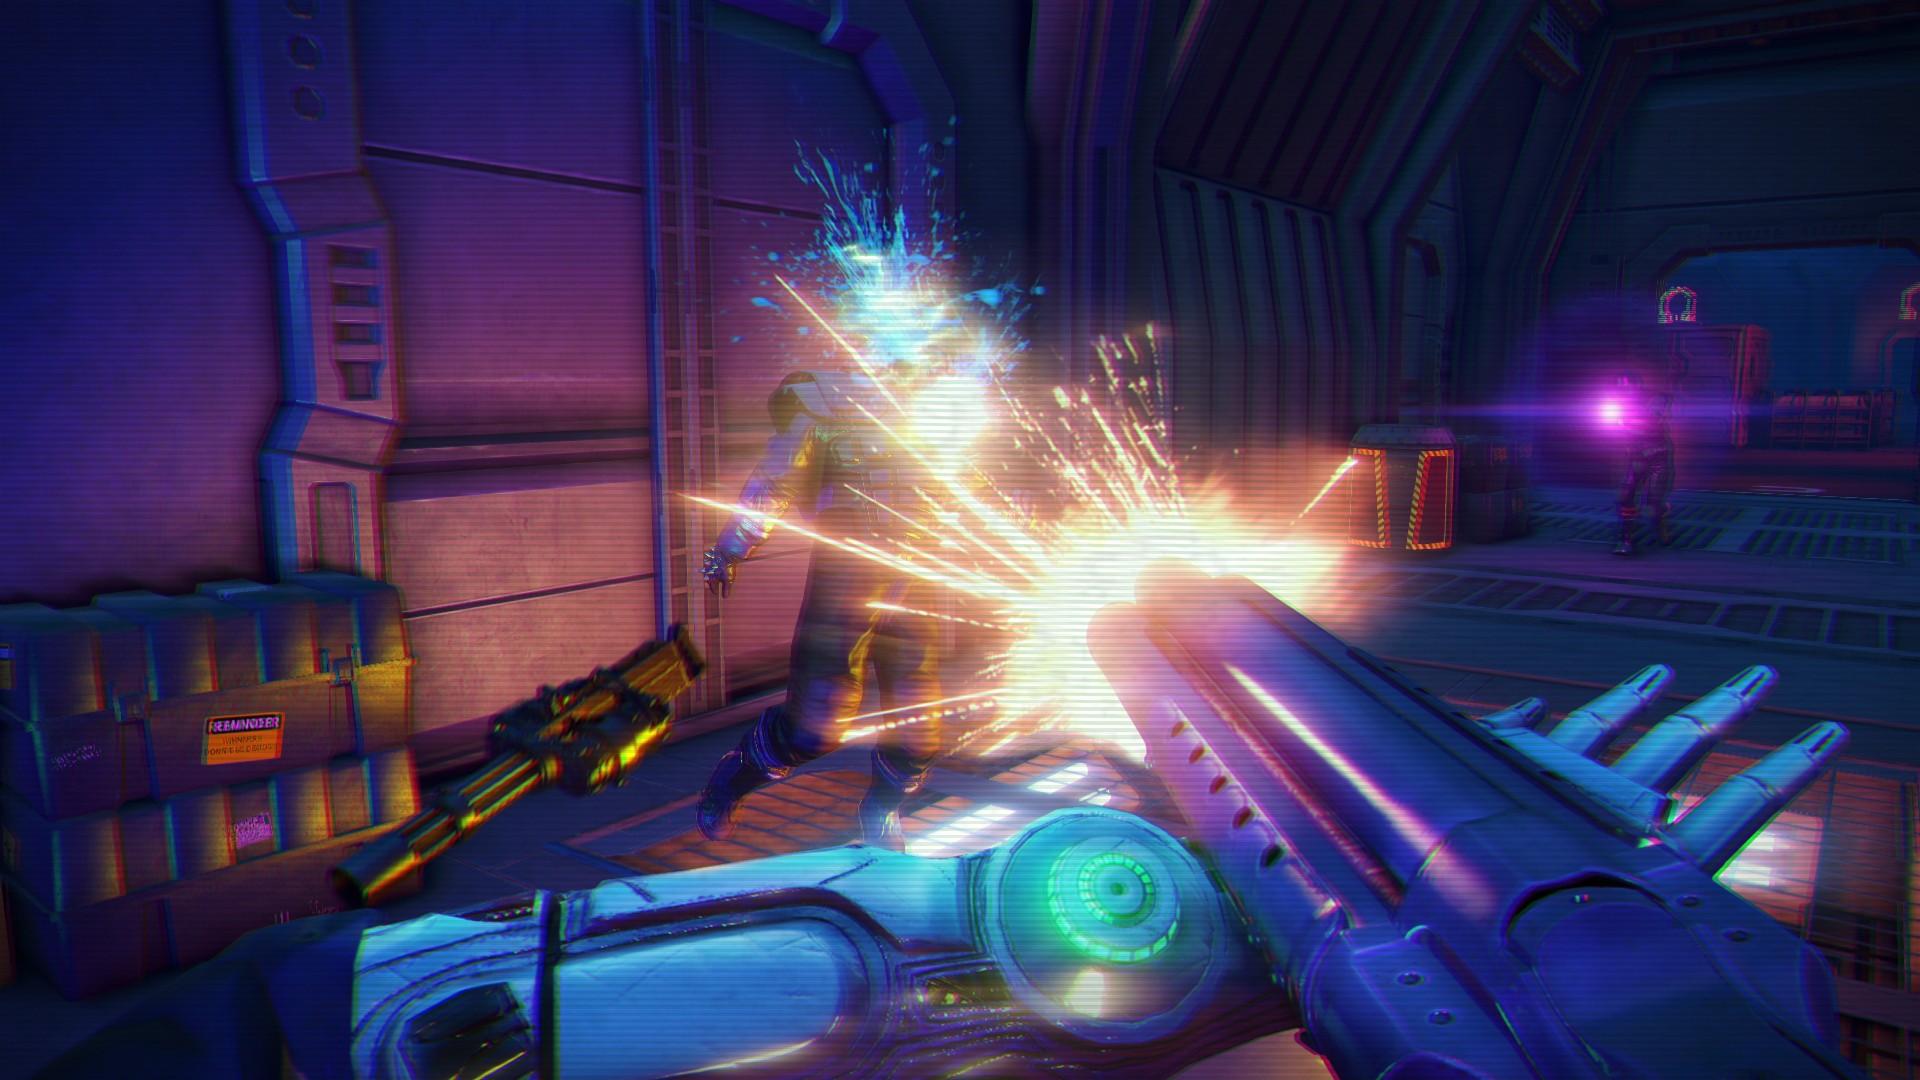 free download far cry blood dragon ps5